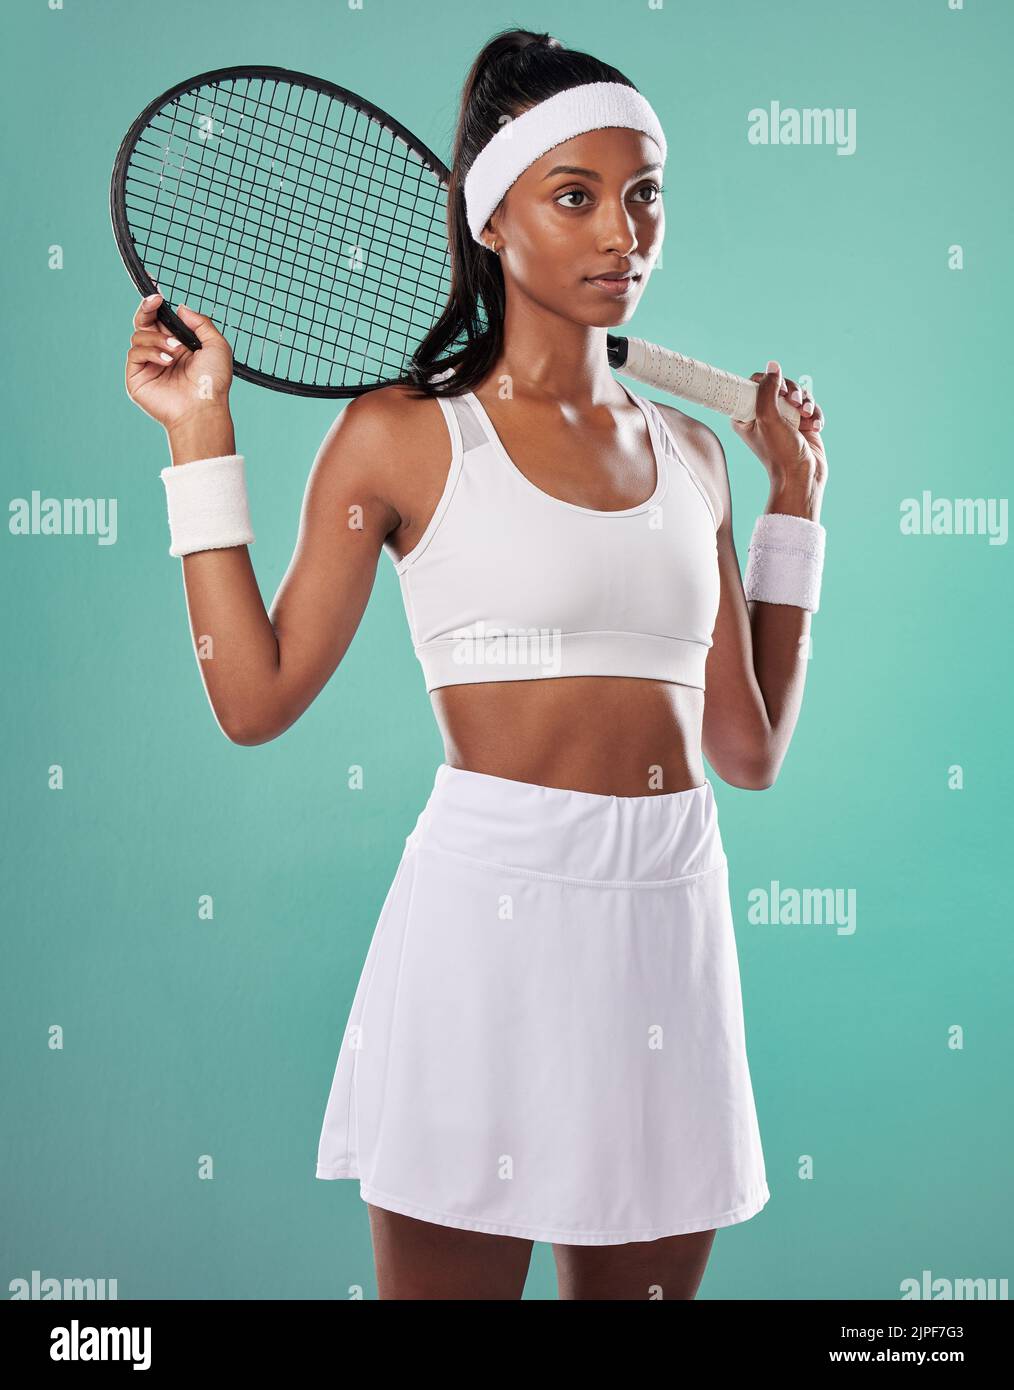 Tennis uniform stock photography and images Alamy